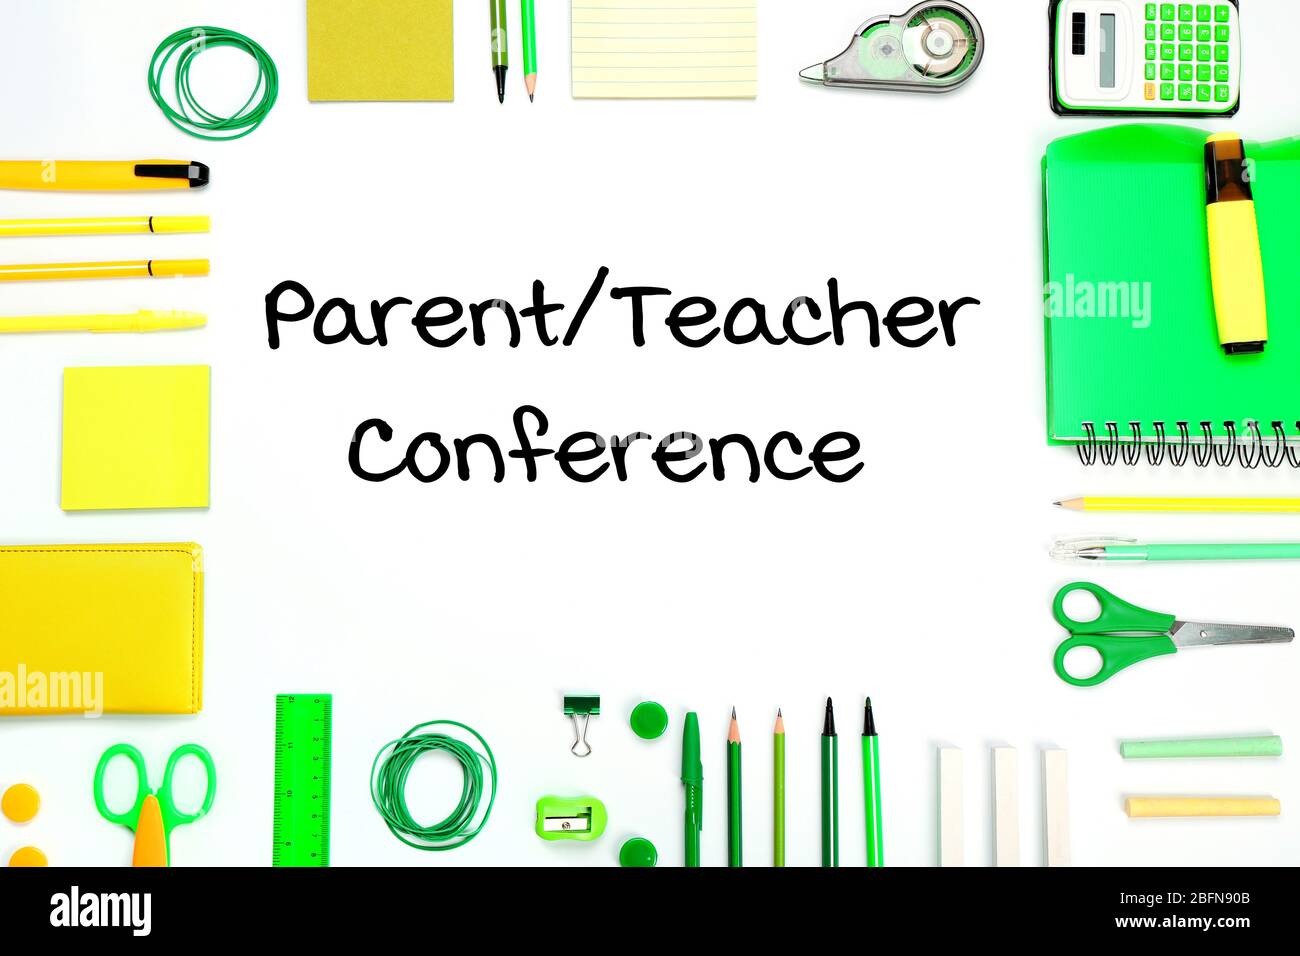 Text PARENT/TEACHER CONFERENCE with stationary on white background. School concept. Stock Photo